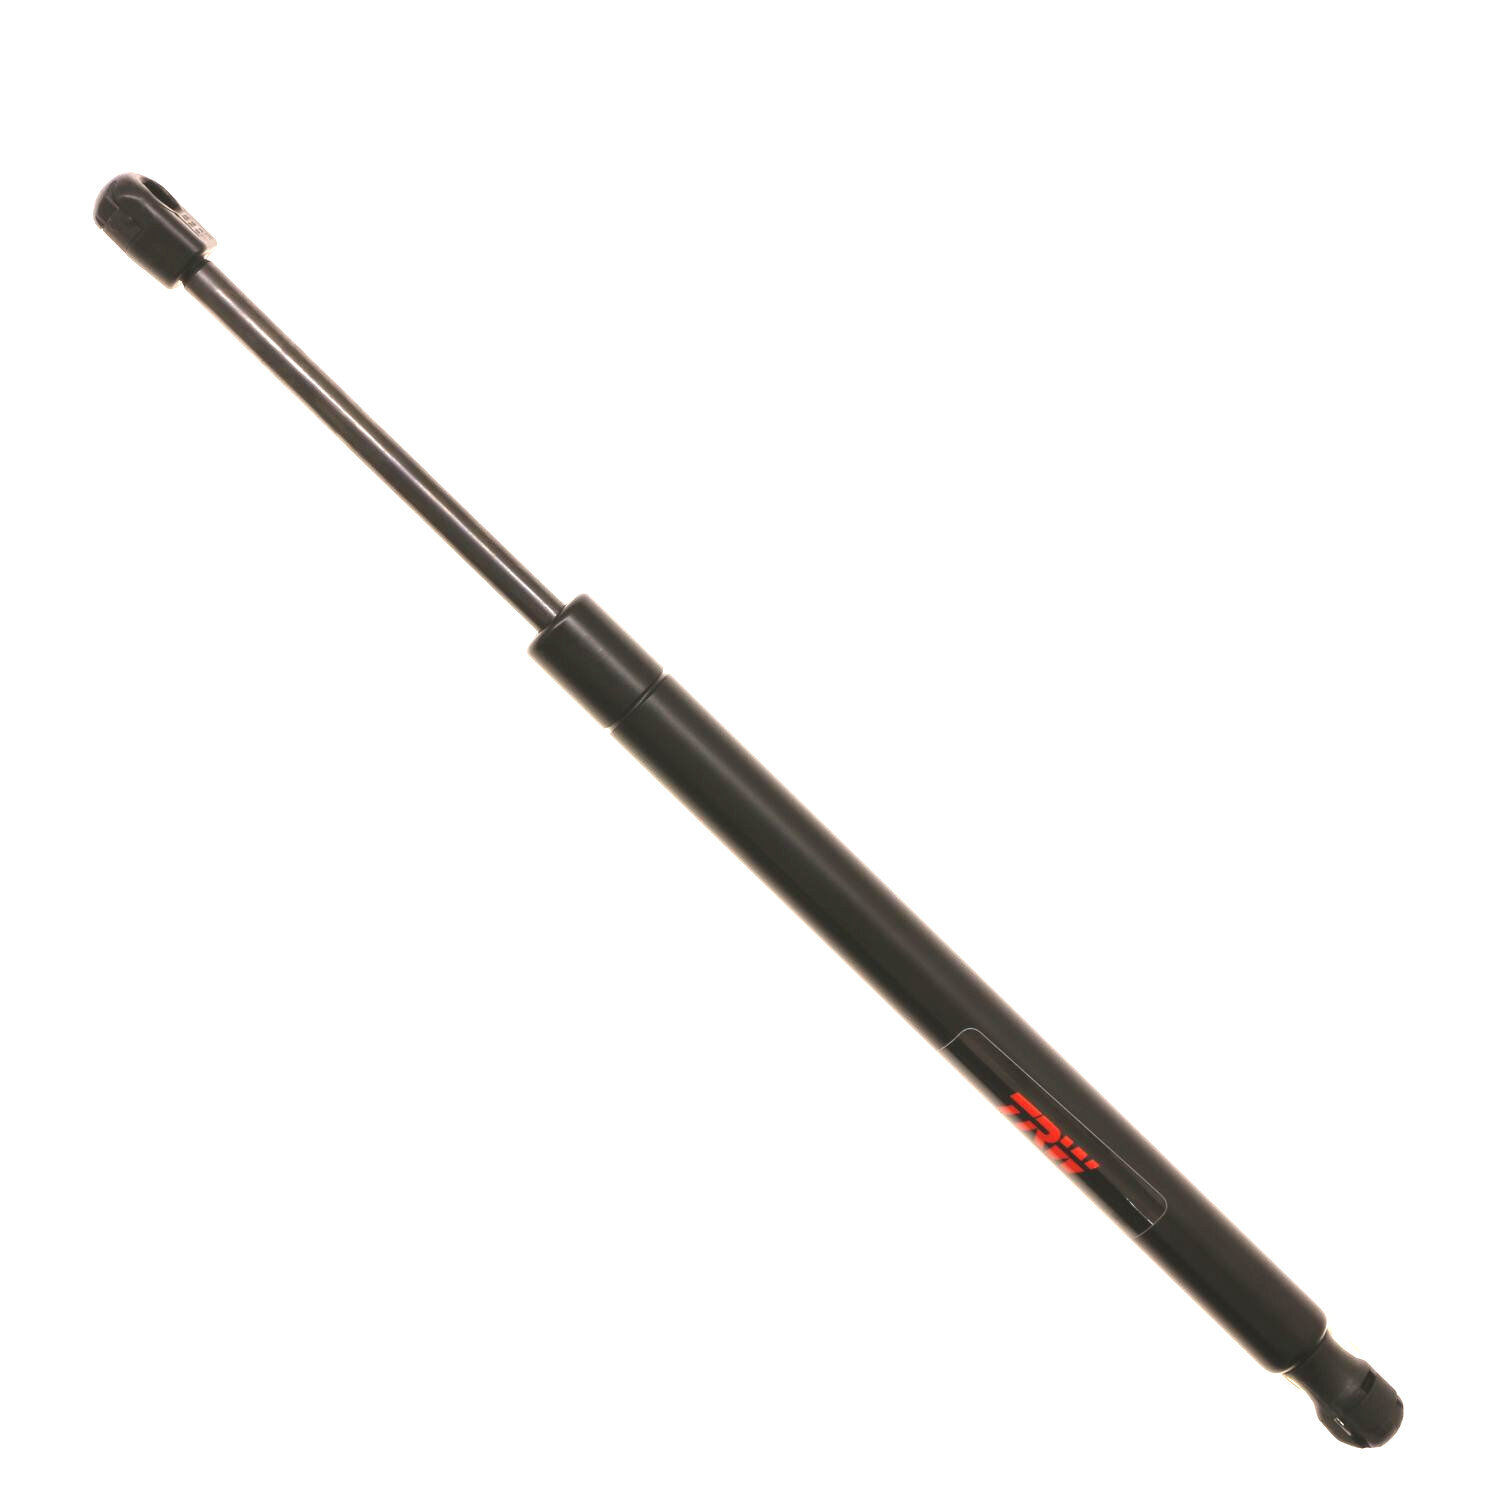 TRW TSG328002 Hatch Lift Support for Mitsubishi Eclipse 06-09 & Other Vehicles